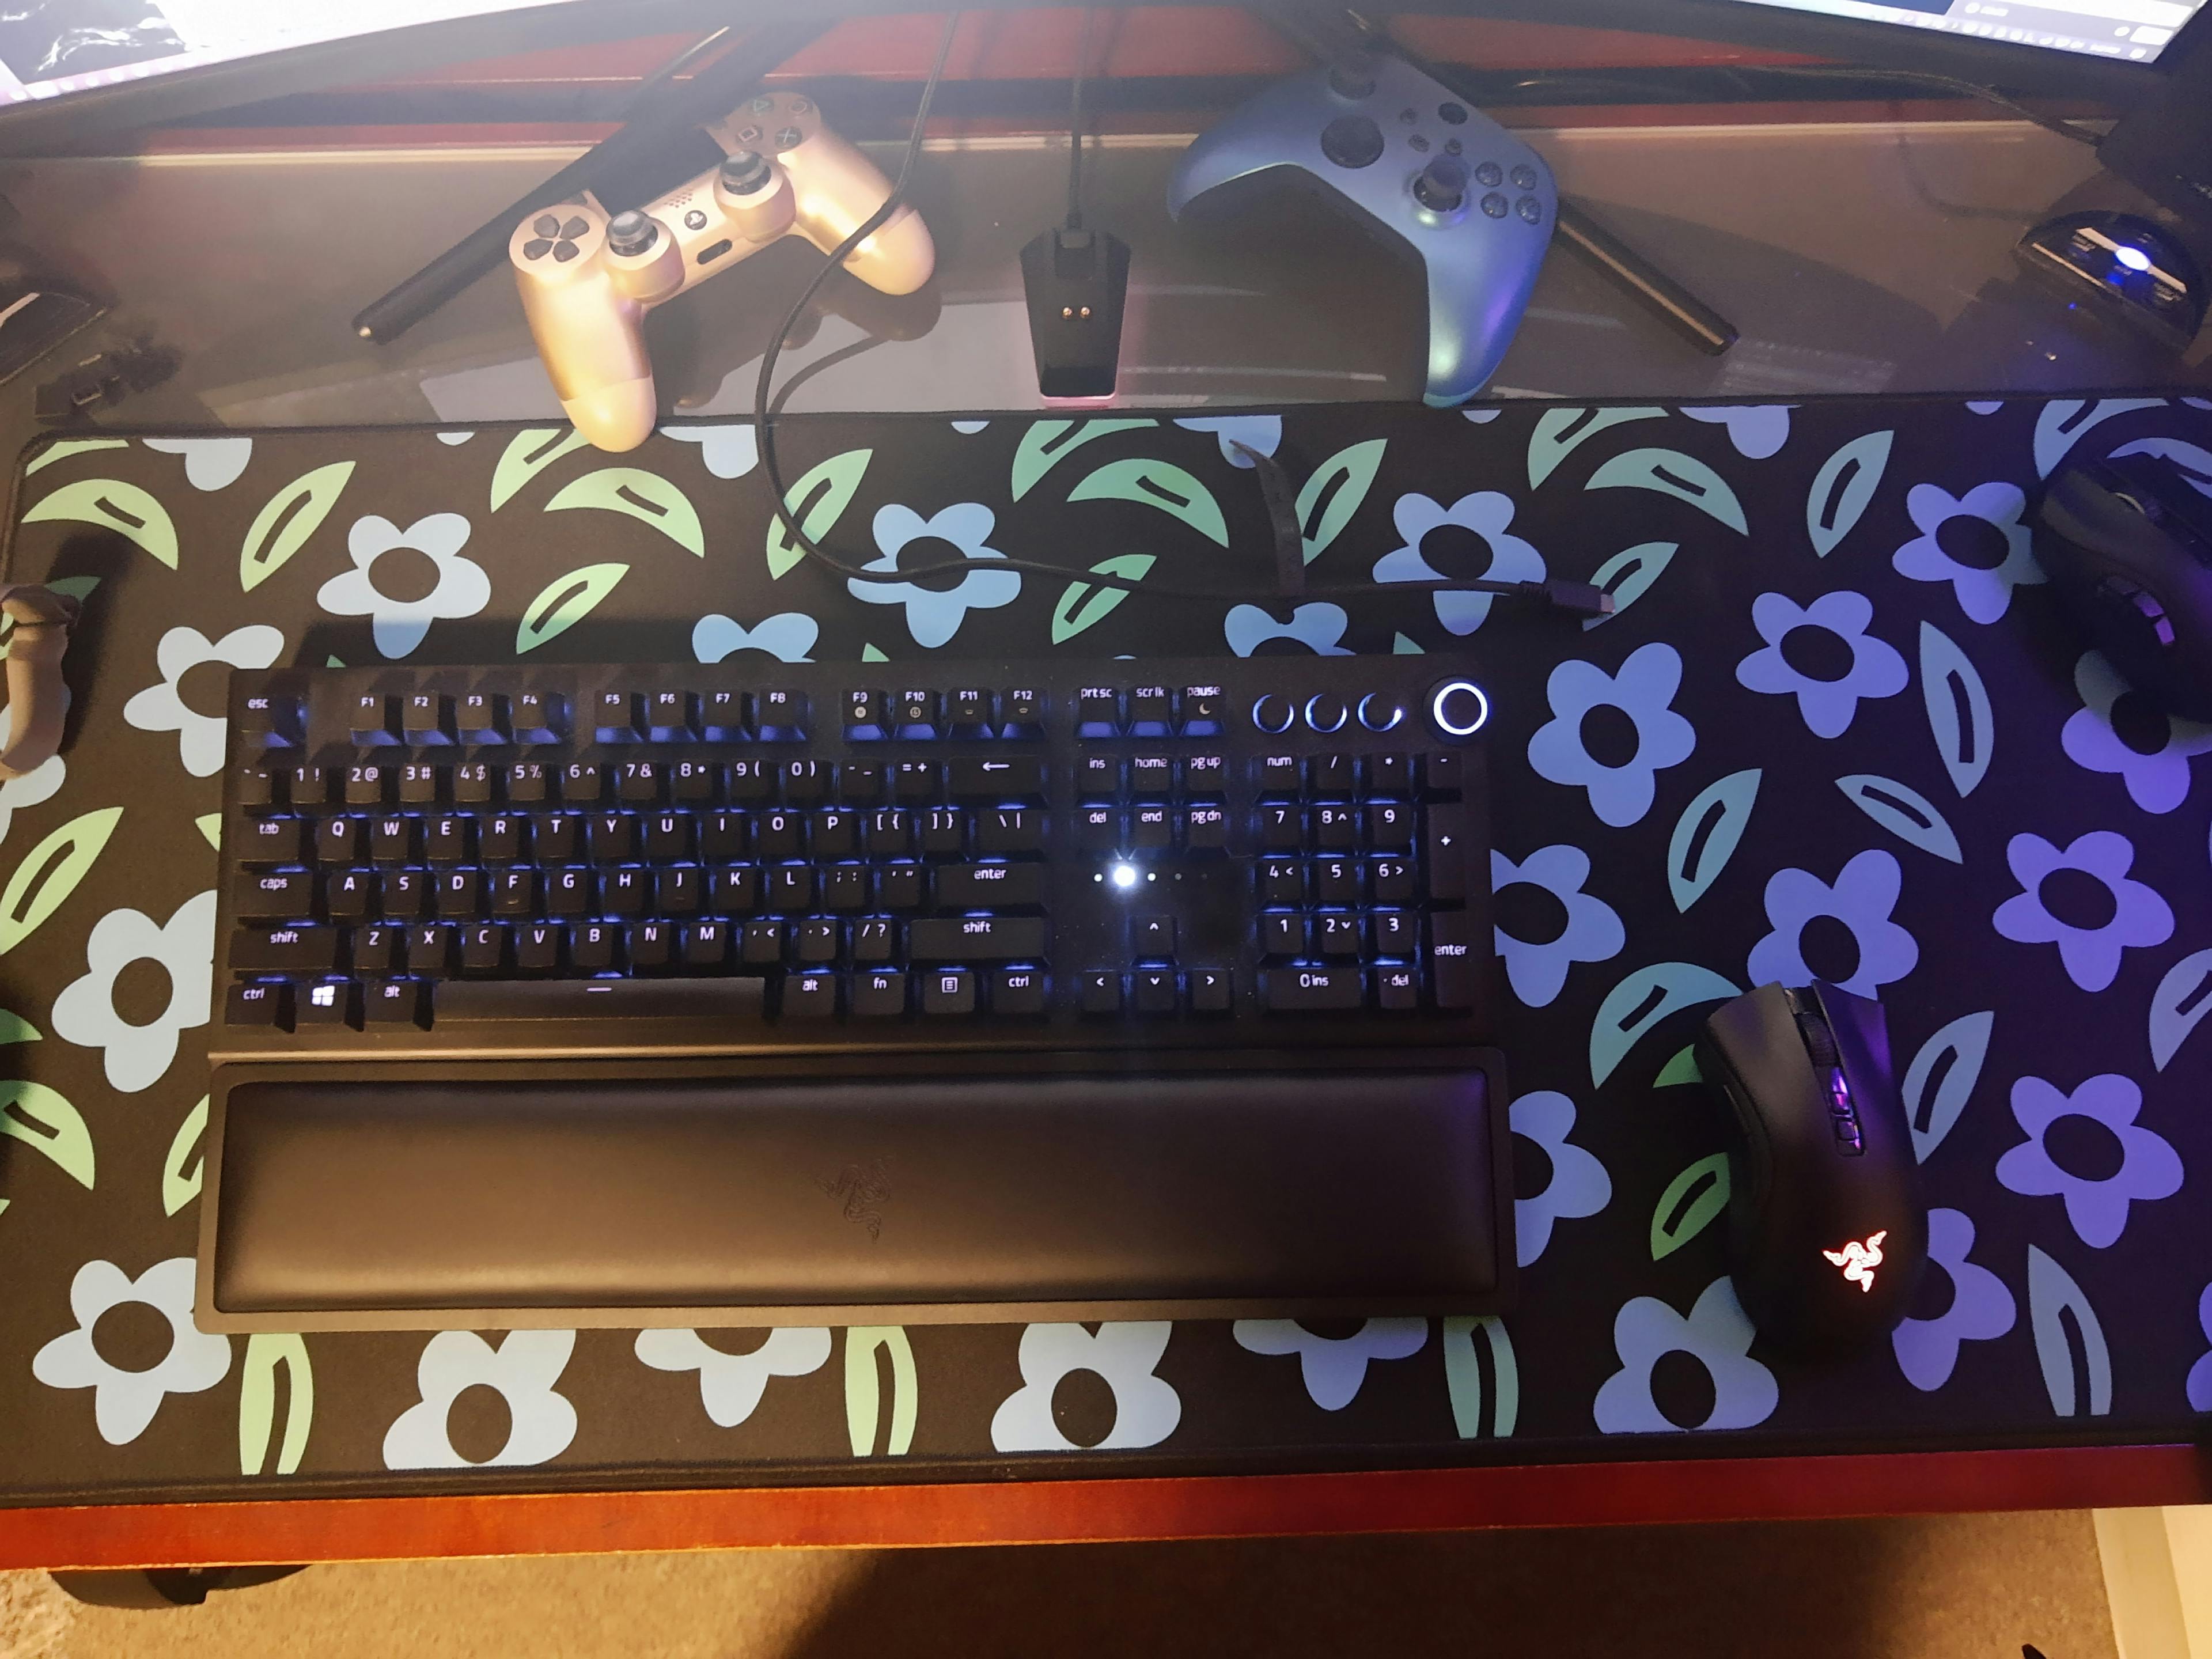 Review photo of deskmat by Grant